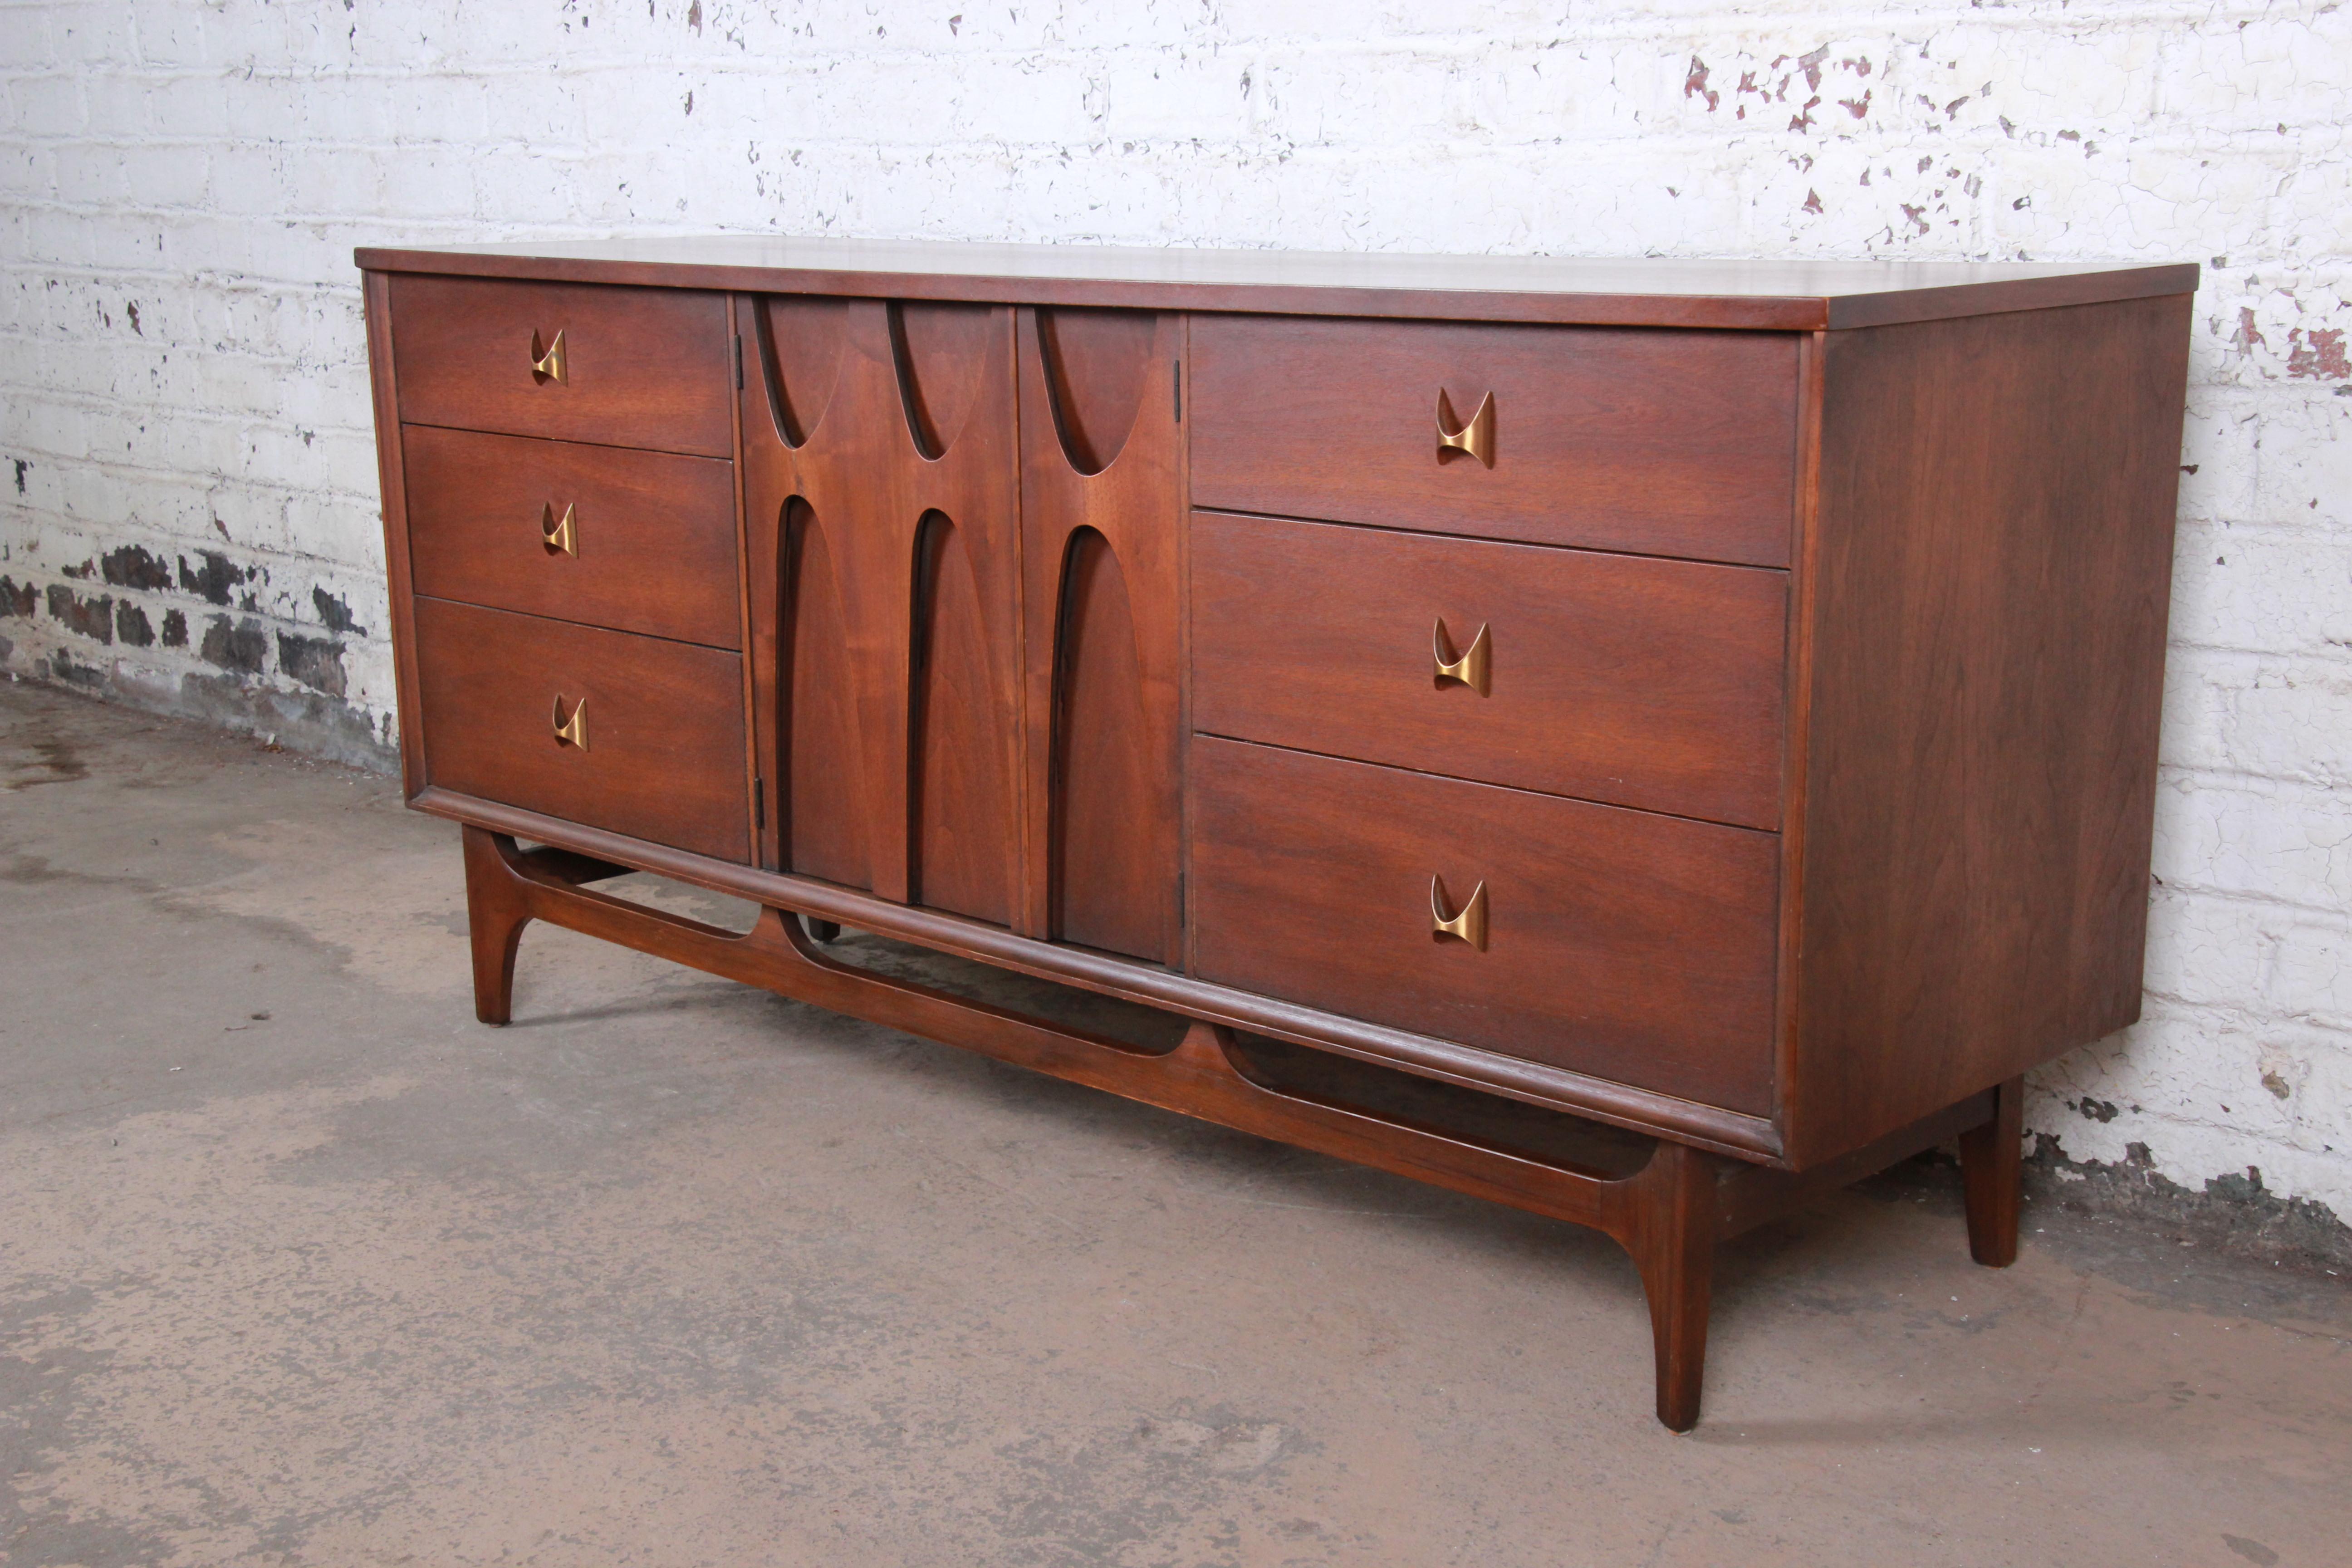 Mid-Century Modern sculpted walnut long dresser or credenza

From the 